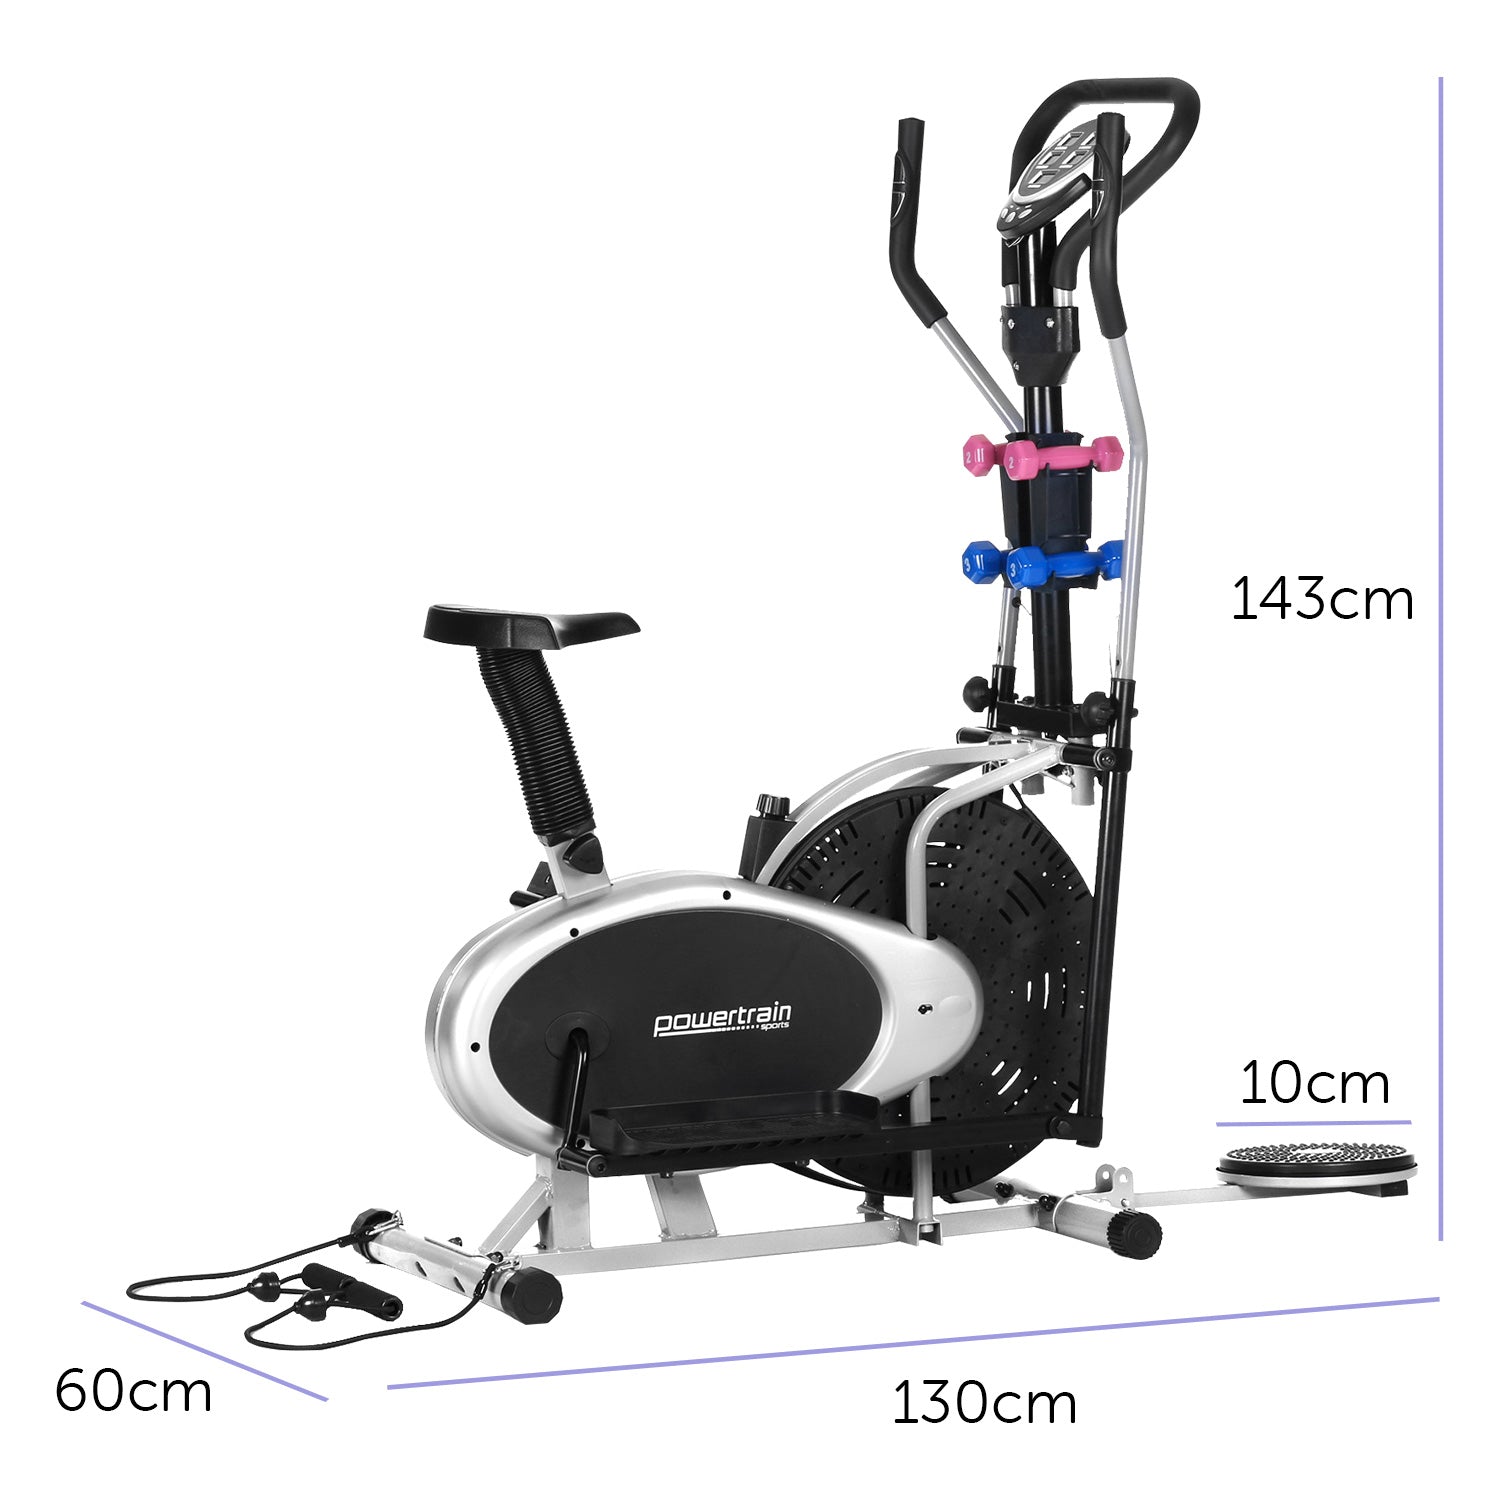 Powertrain 6-in-1 Elliptical Cross Trainer Bike with Weights and Twist Disc - SILBERSHELL